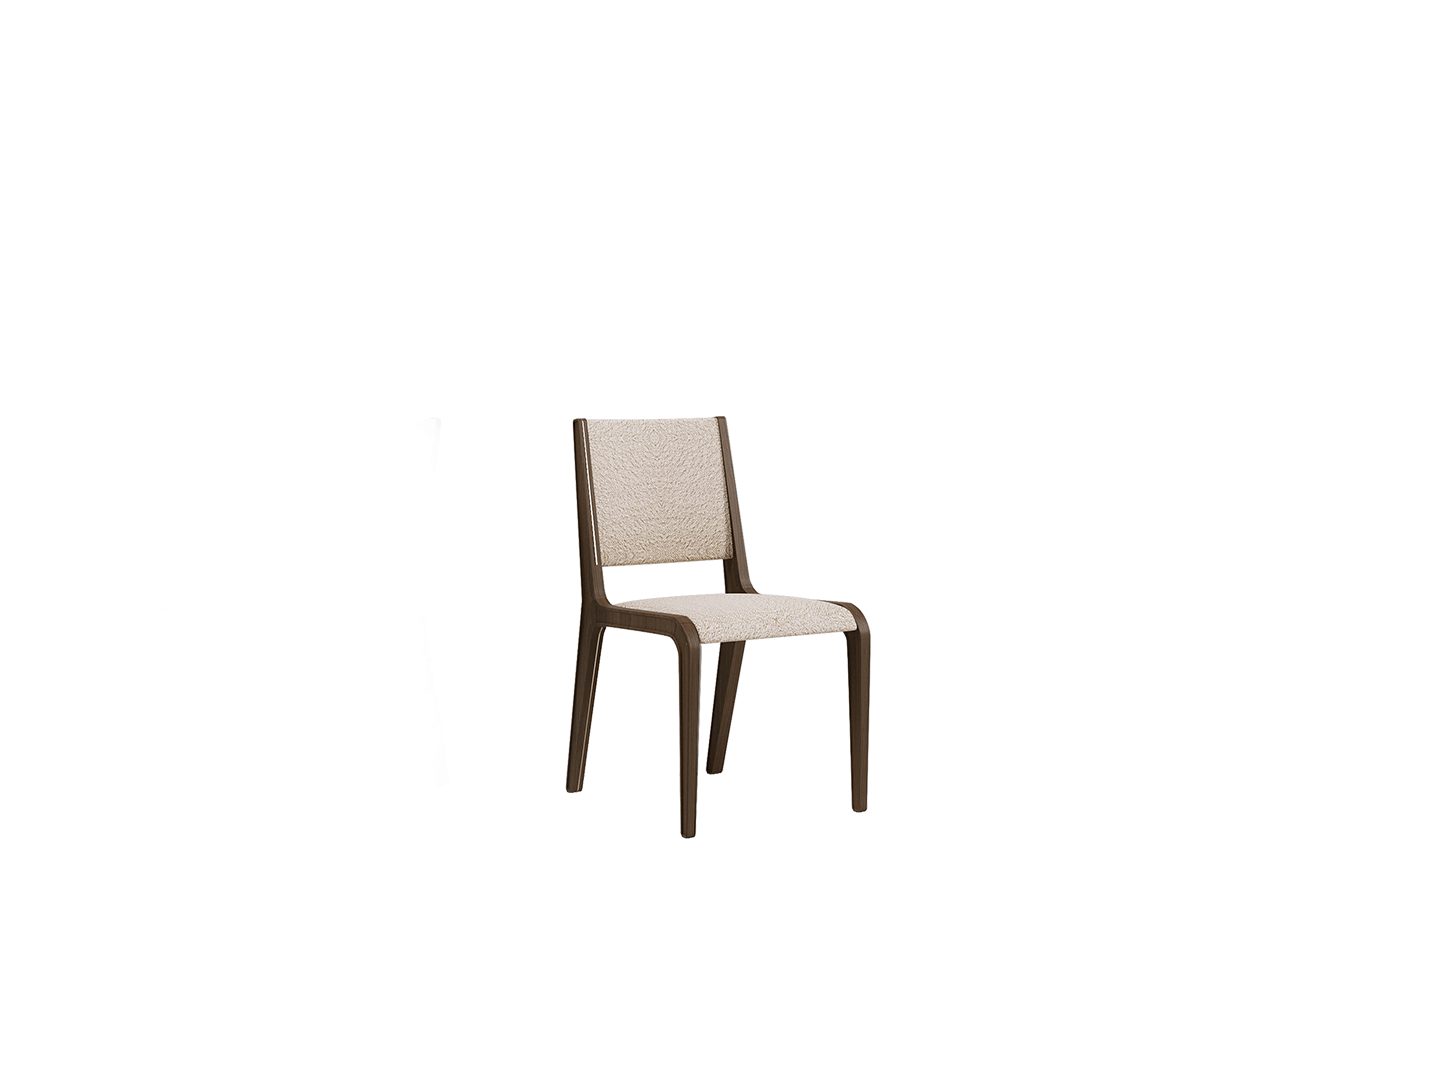 Selima chair